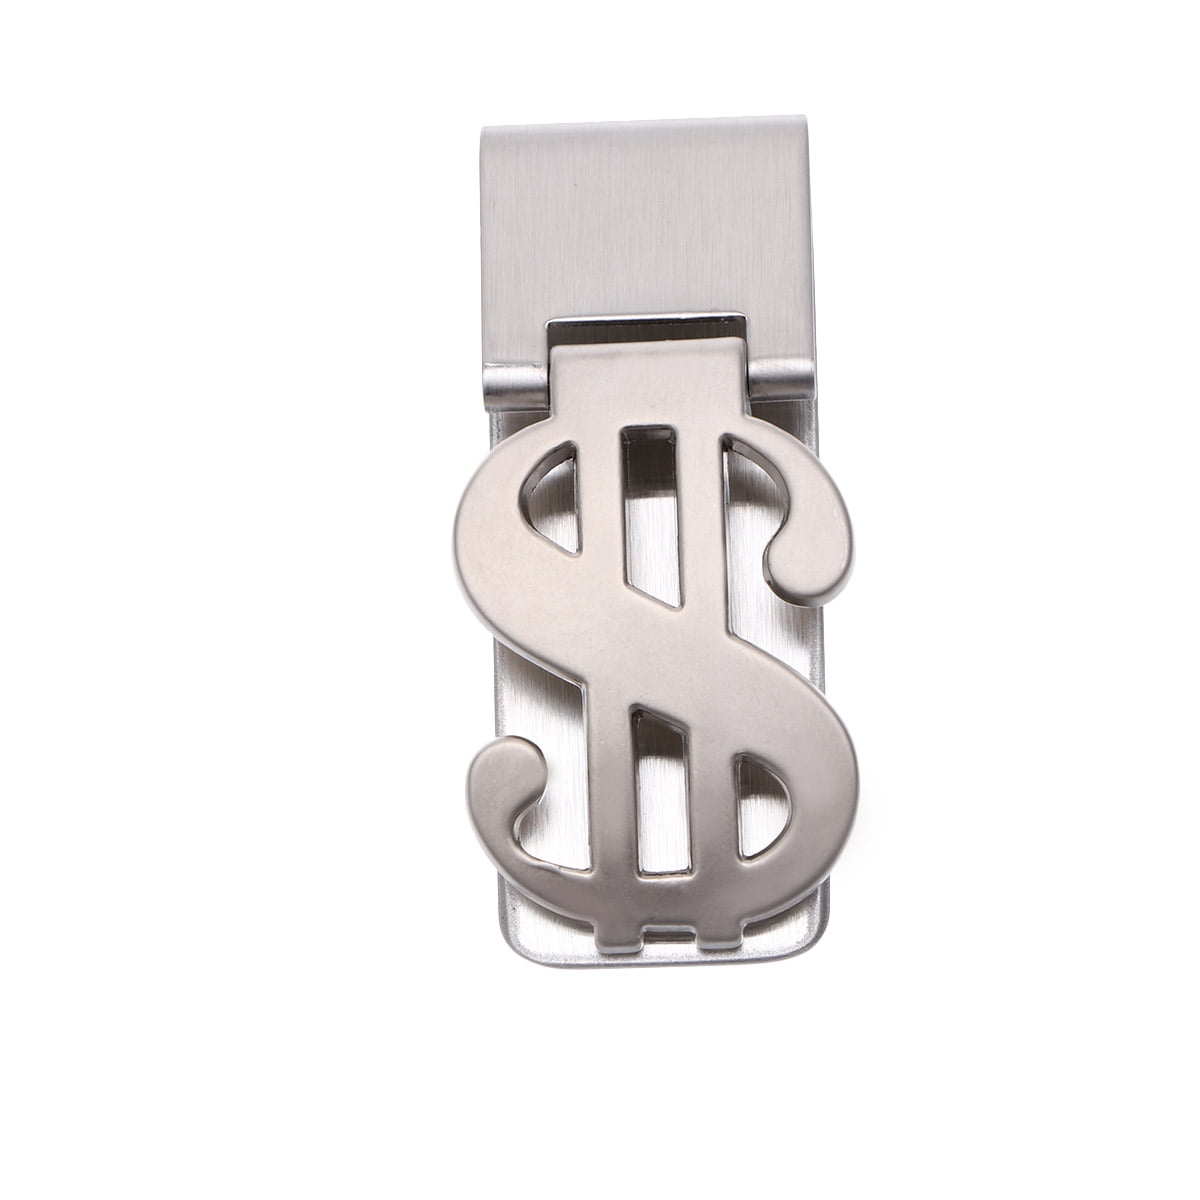 Silver Euro Bill Stainless Steel Hinged Money Clips 